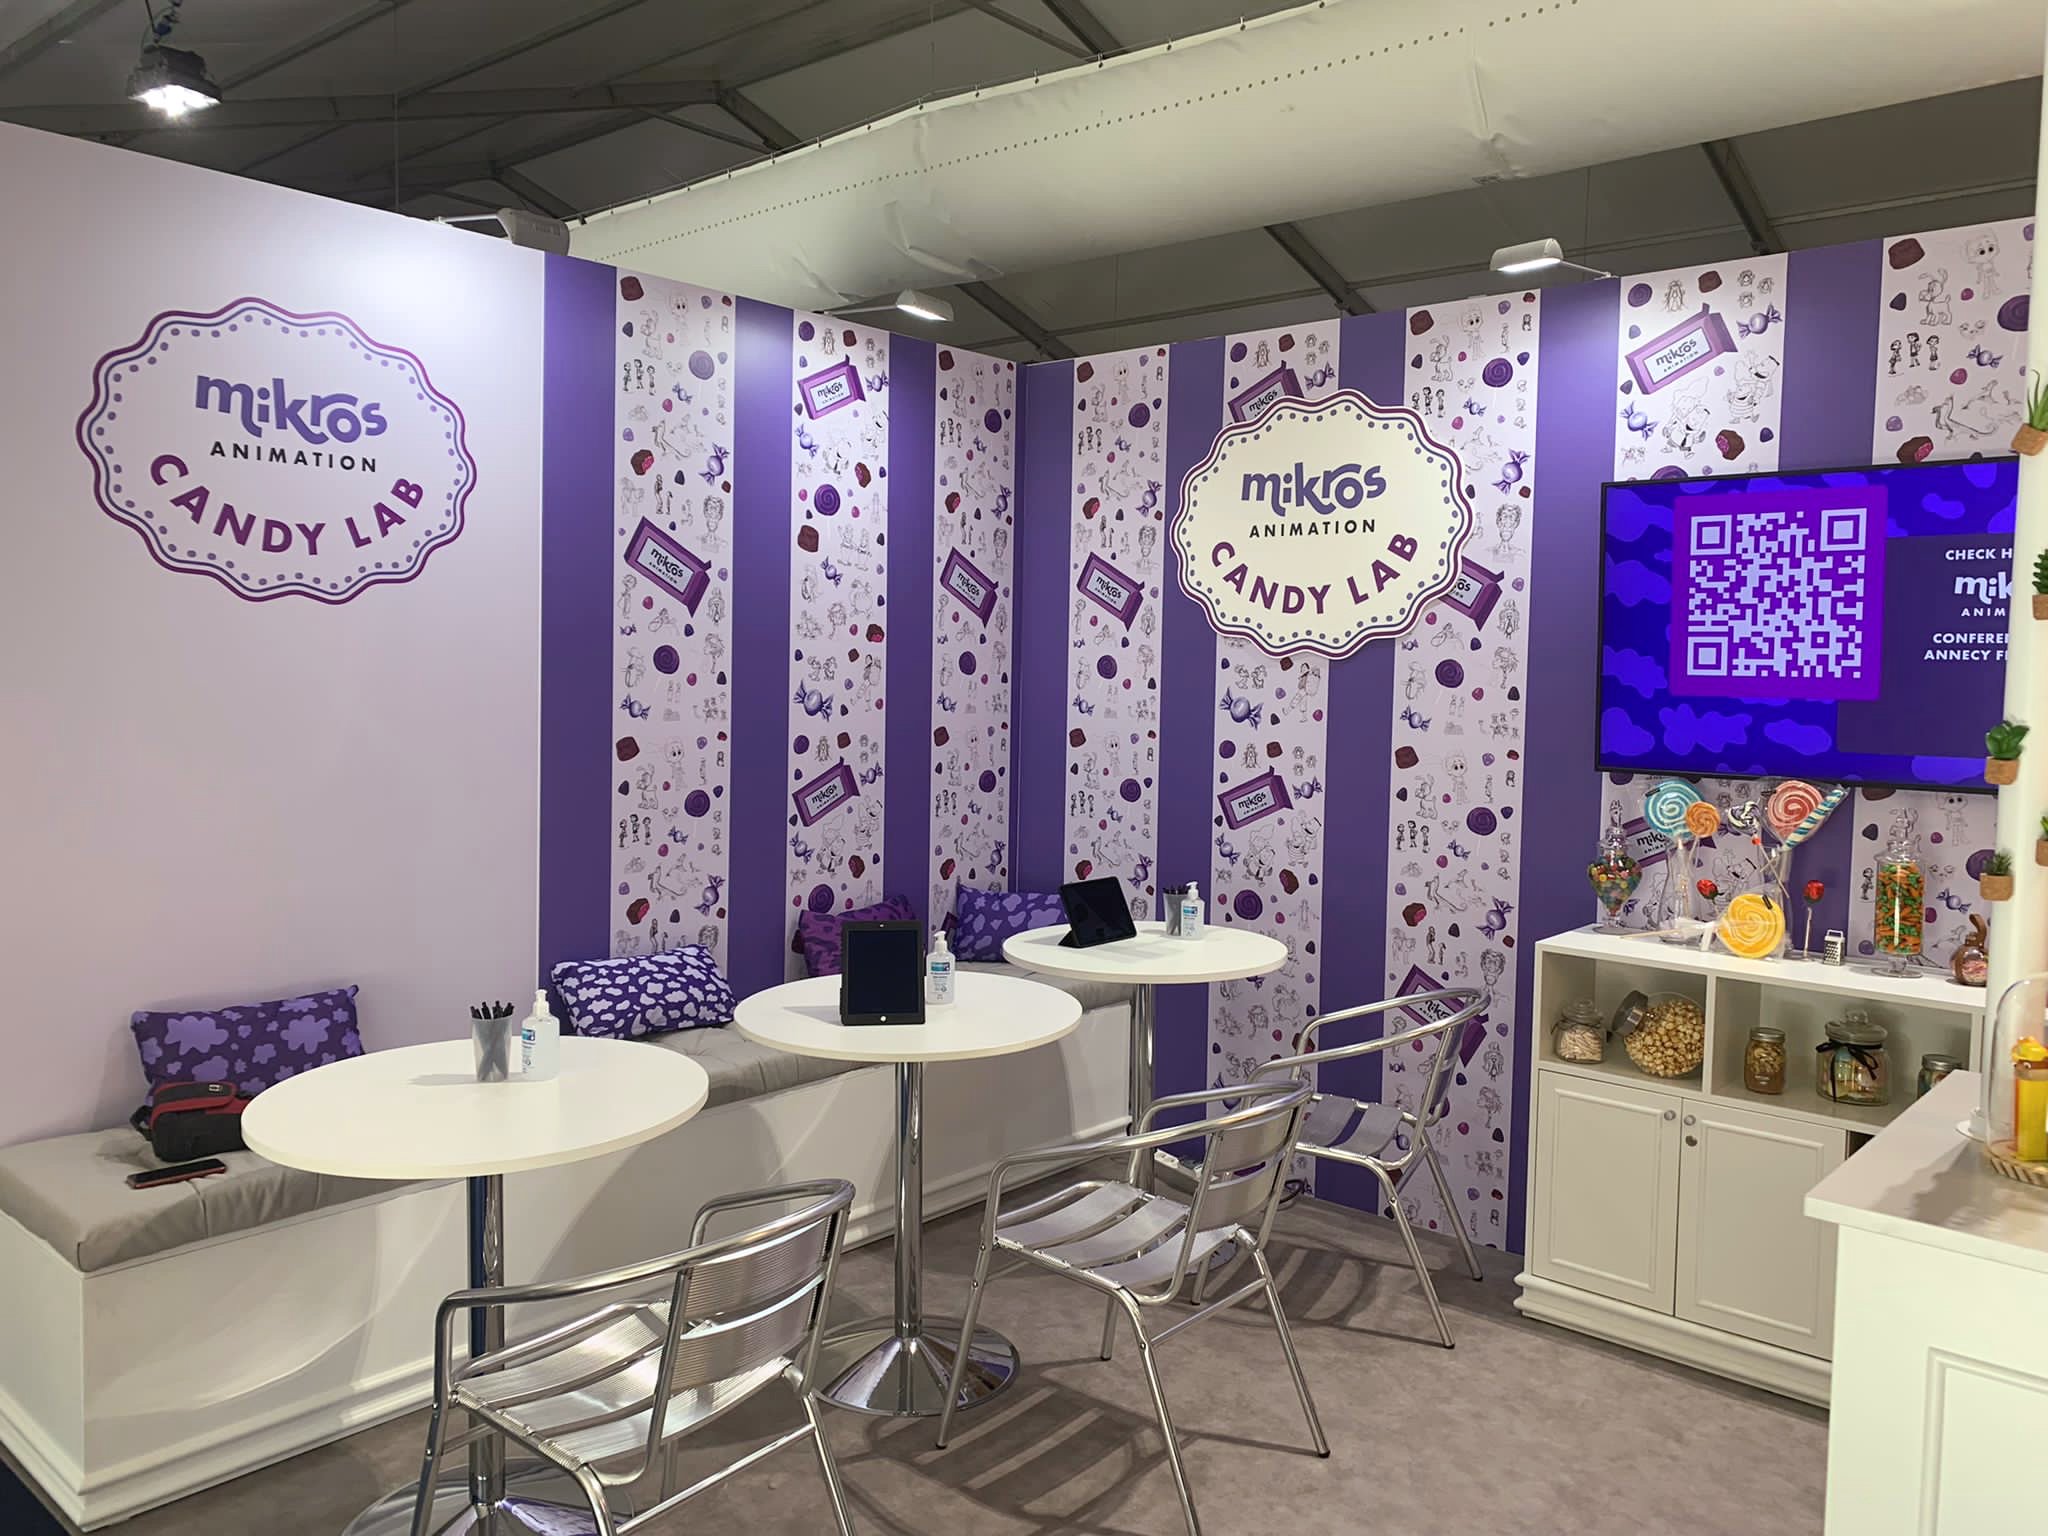 MIKROS_CandyLab-Booth-6.jpg